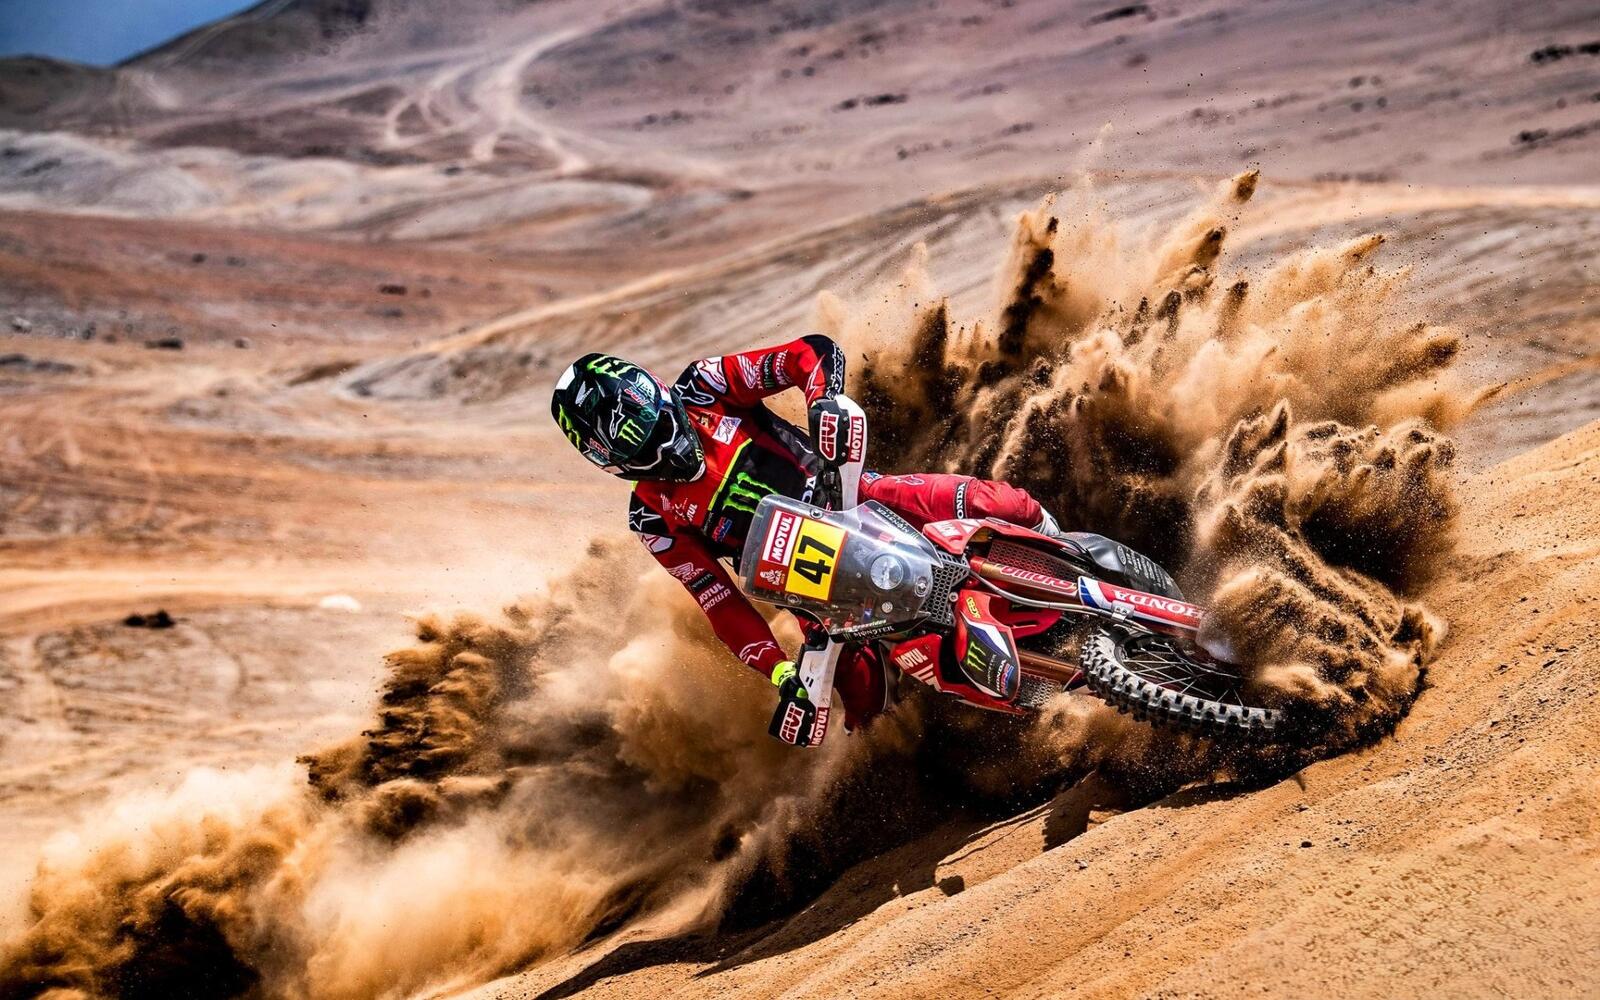 Free photo A race in the desert